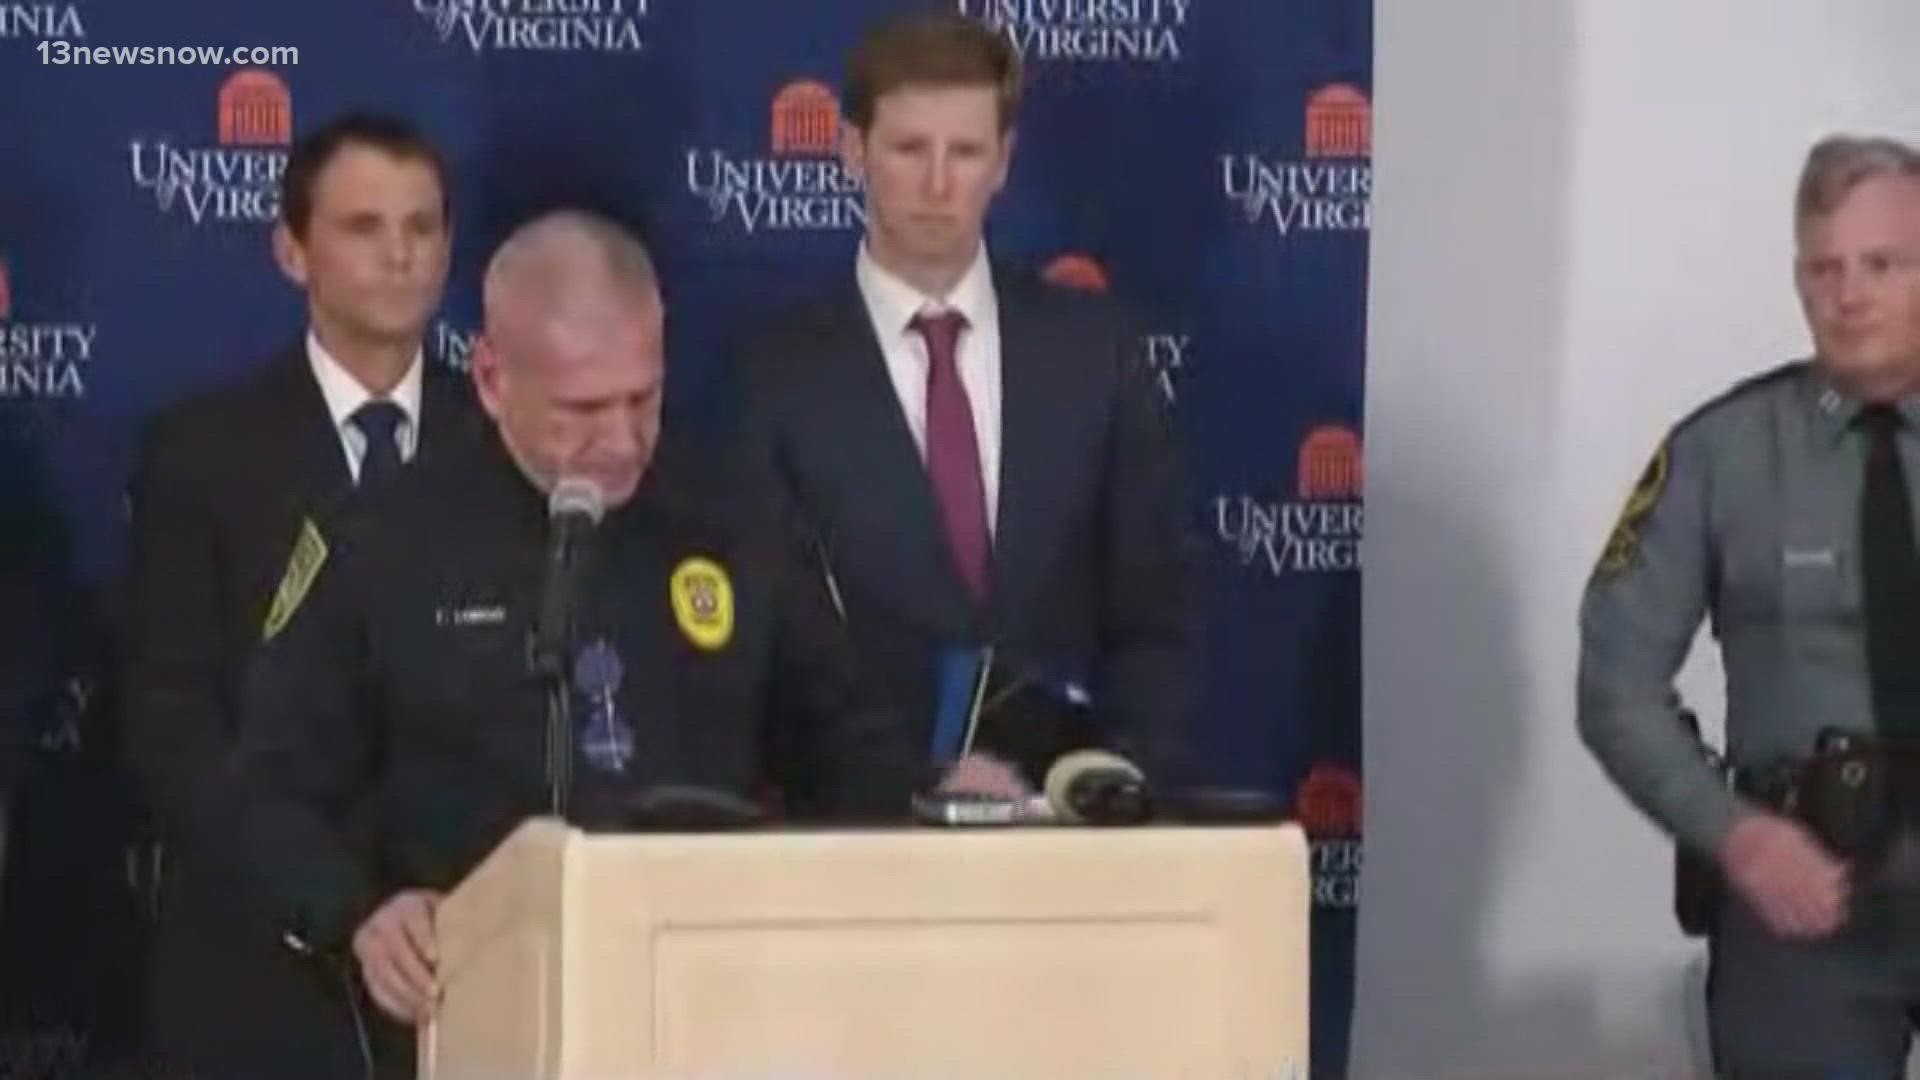 Authorities wrapped up a press conference more than 12 hours after the shooting happened.